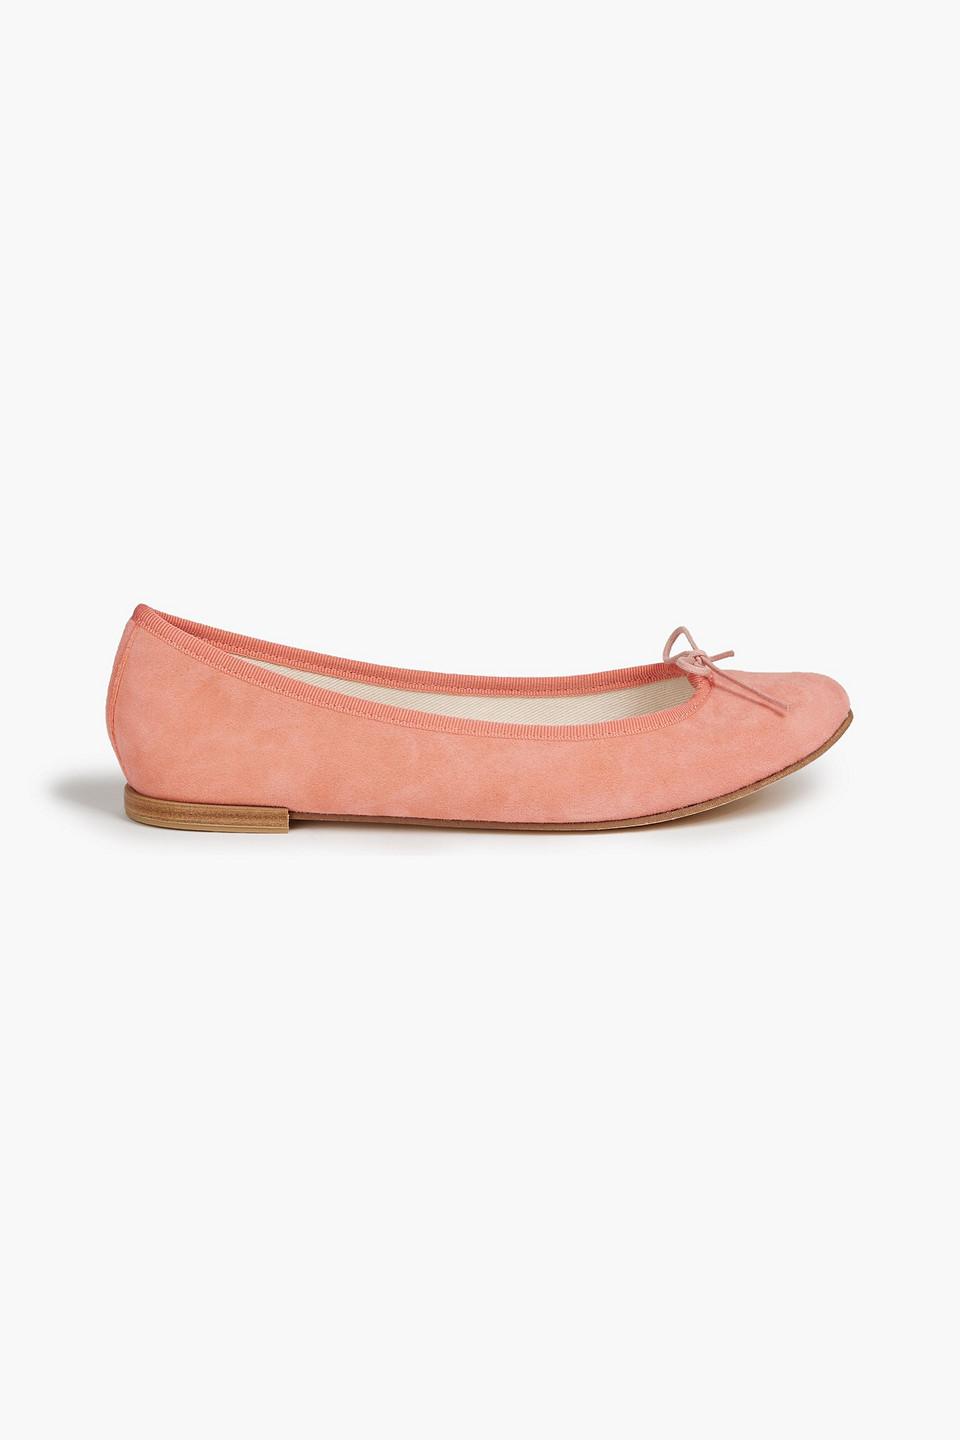 Repetto Suede Ballet Flats in Orange | Lyst